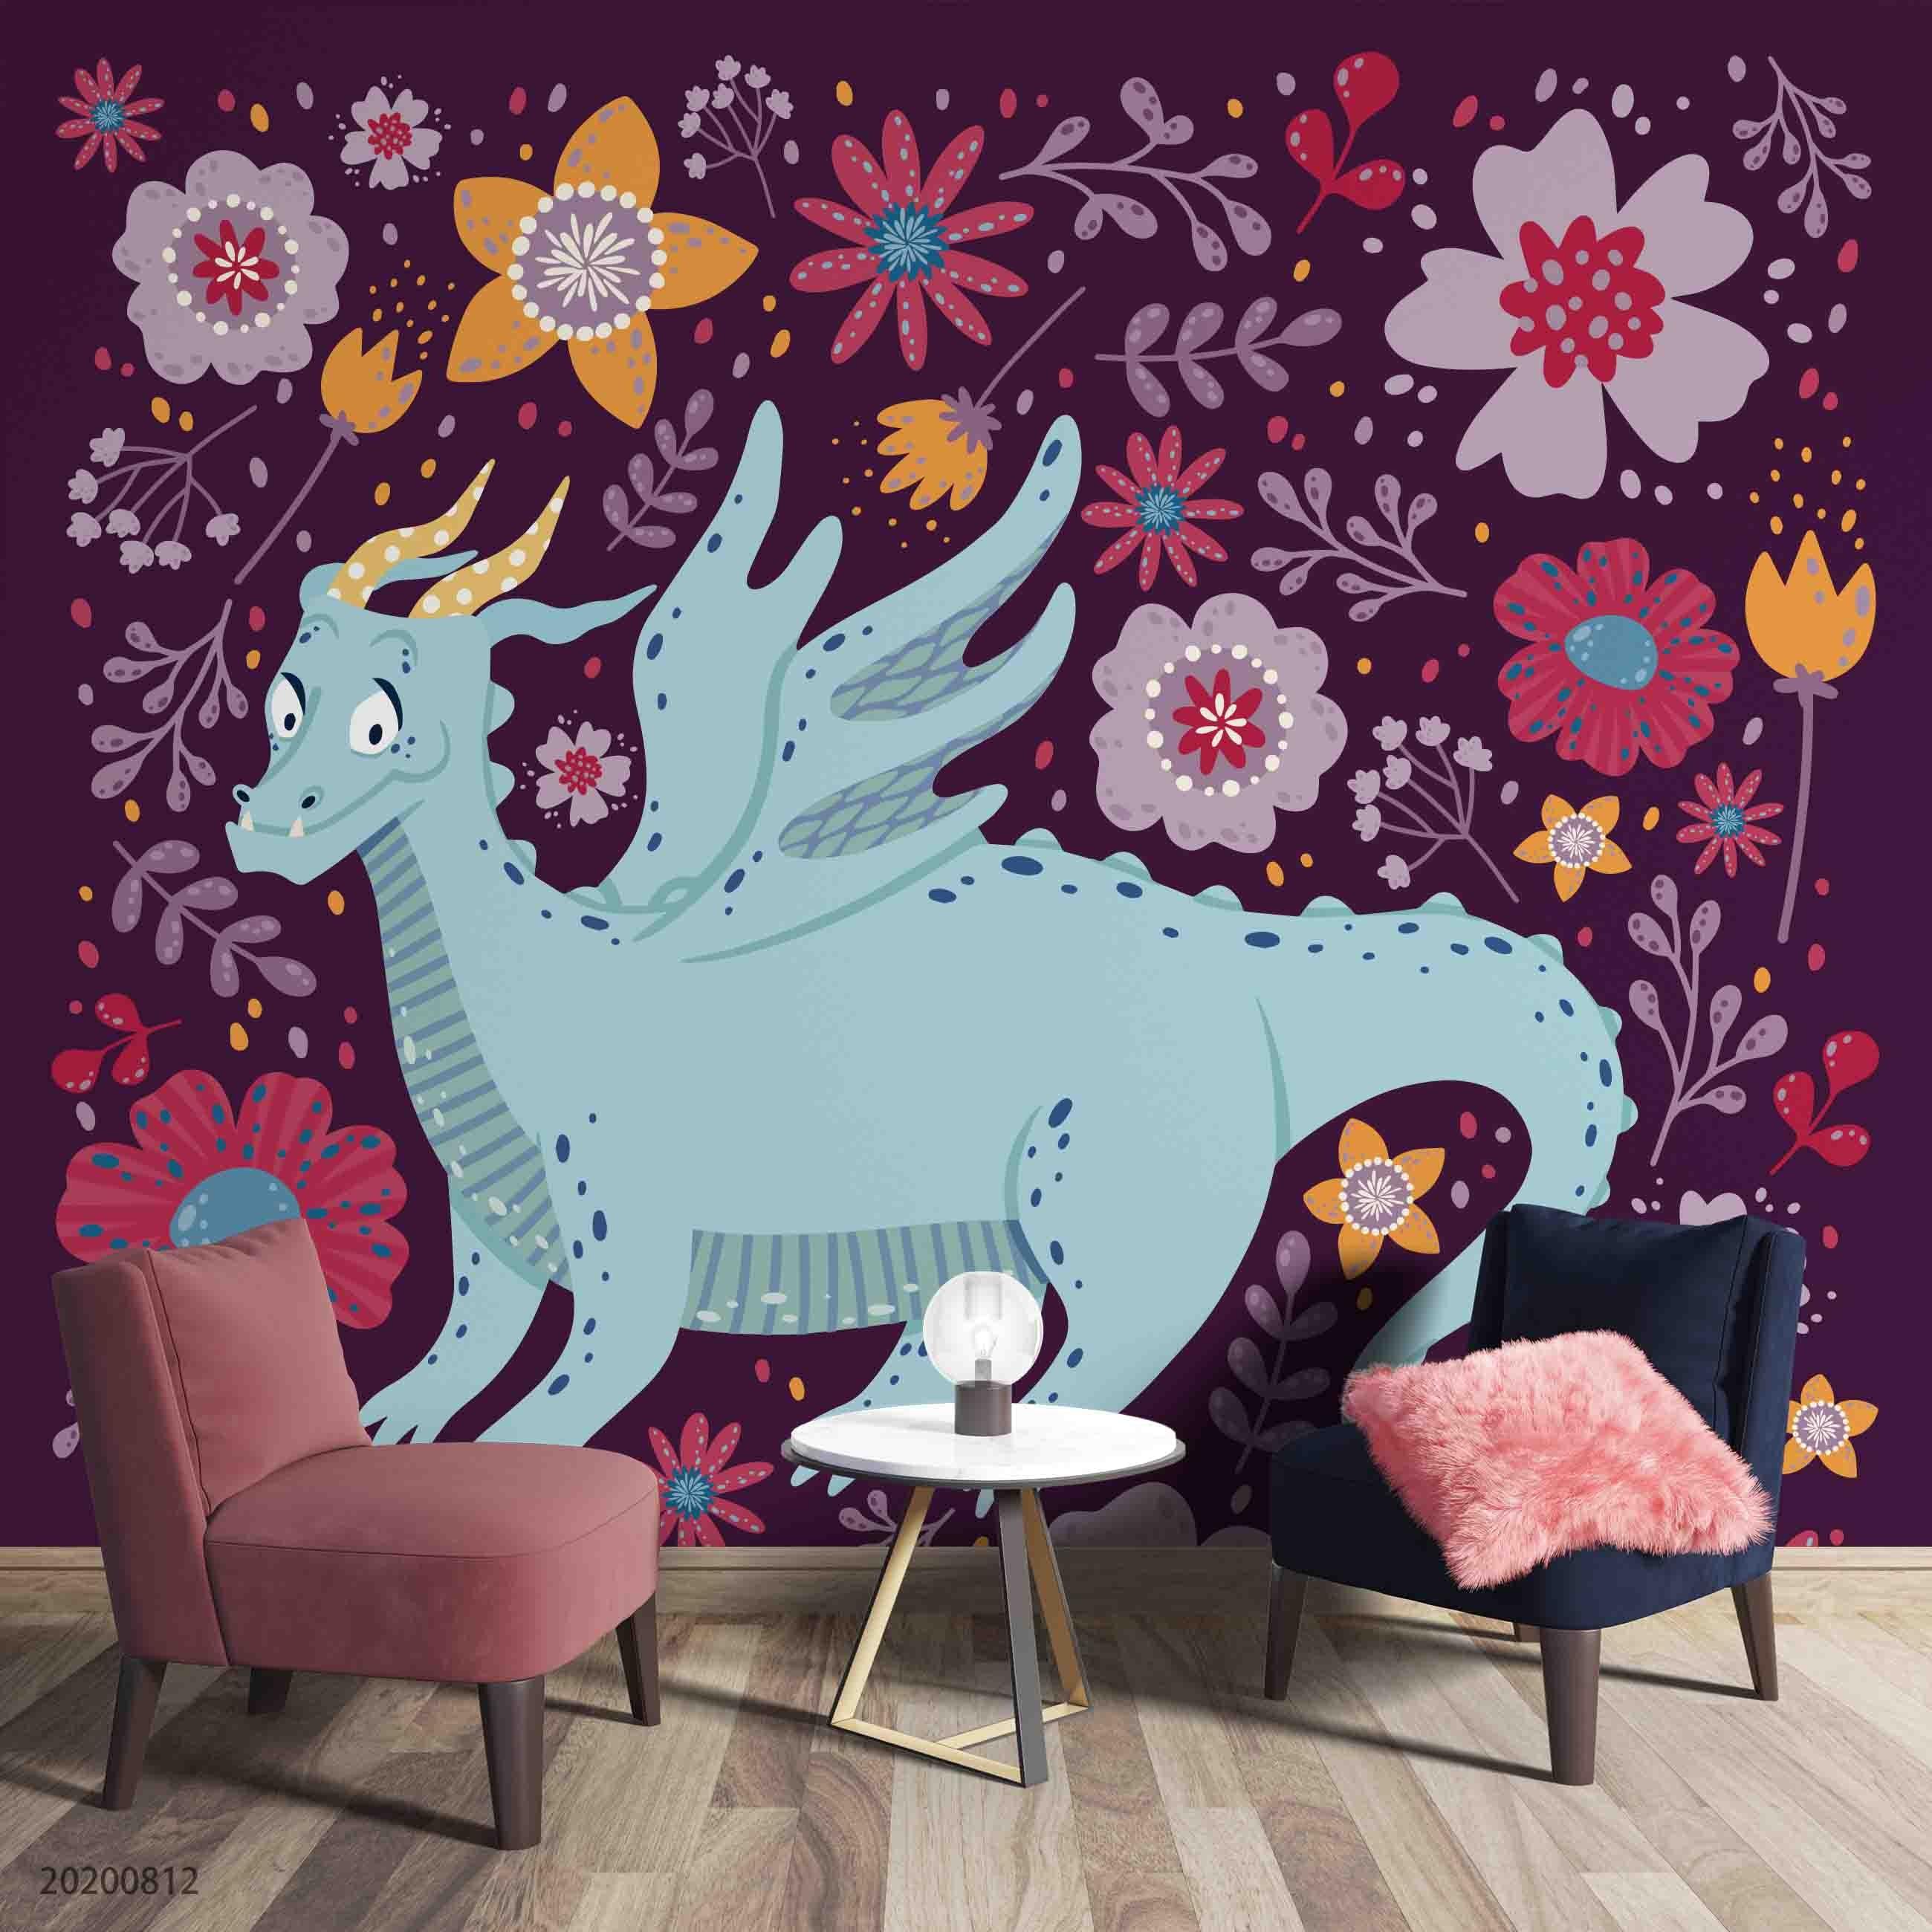 3D Hand Sketching Colorful Floral Blue Giant Dragon Wall Mural Wallpaper LXL 1095- Jess Art Decoration